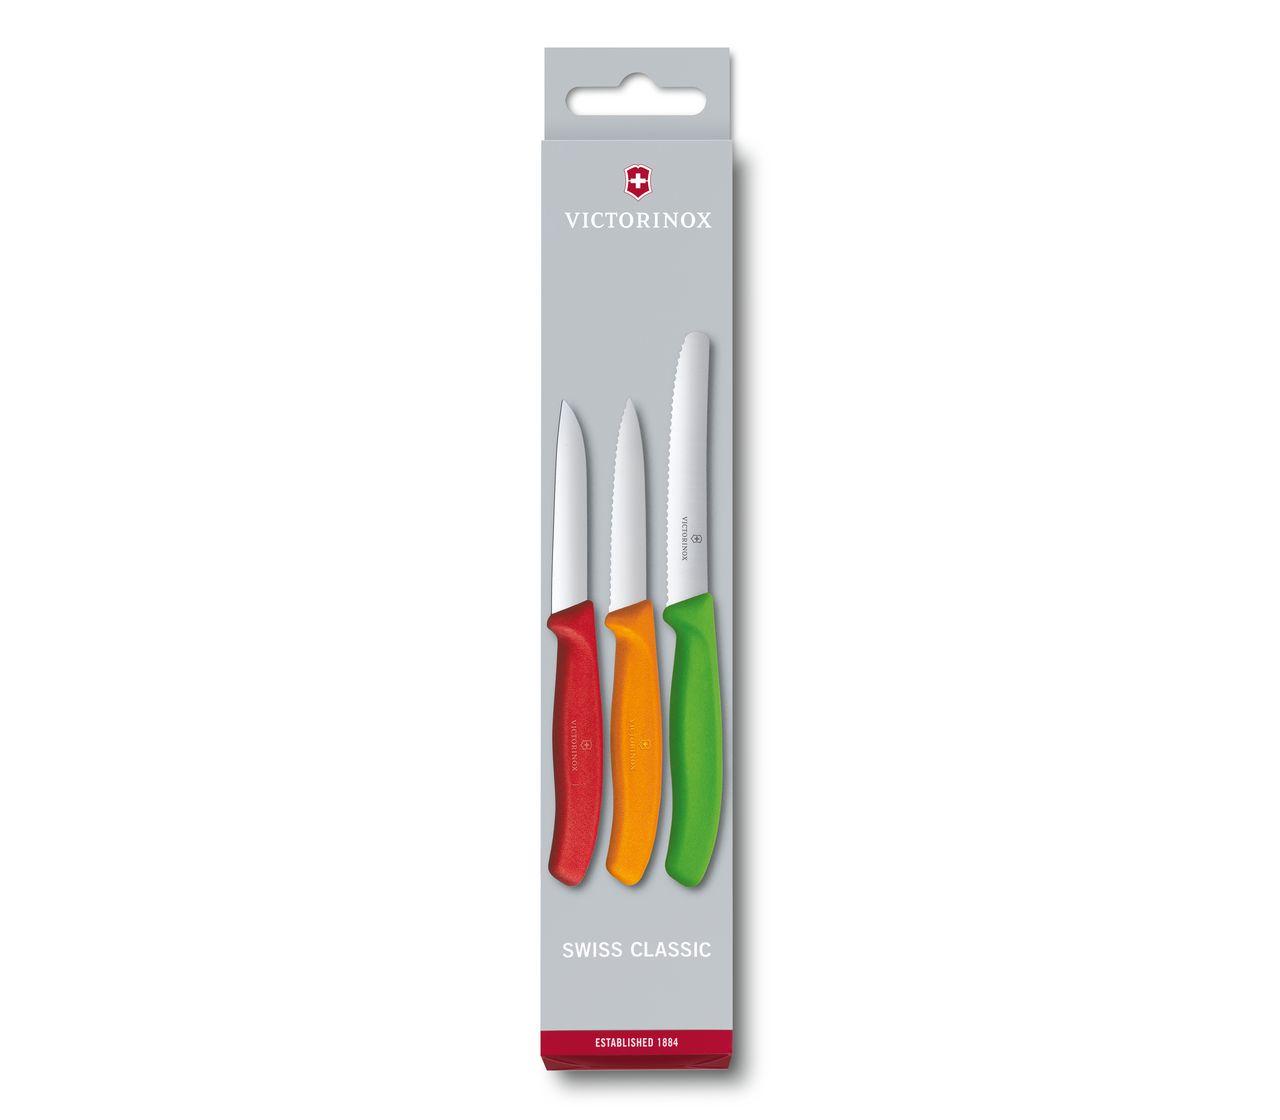 Colored Paring Knives - Set of 3